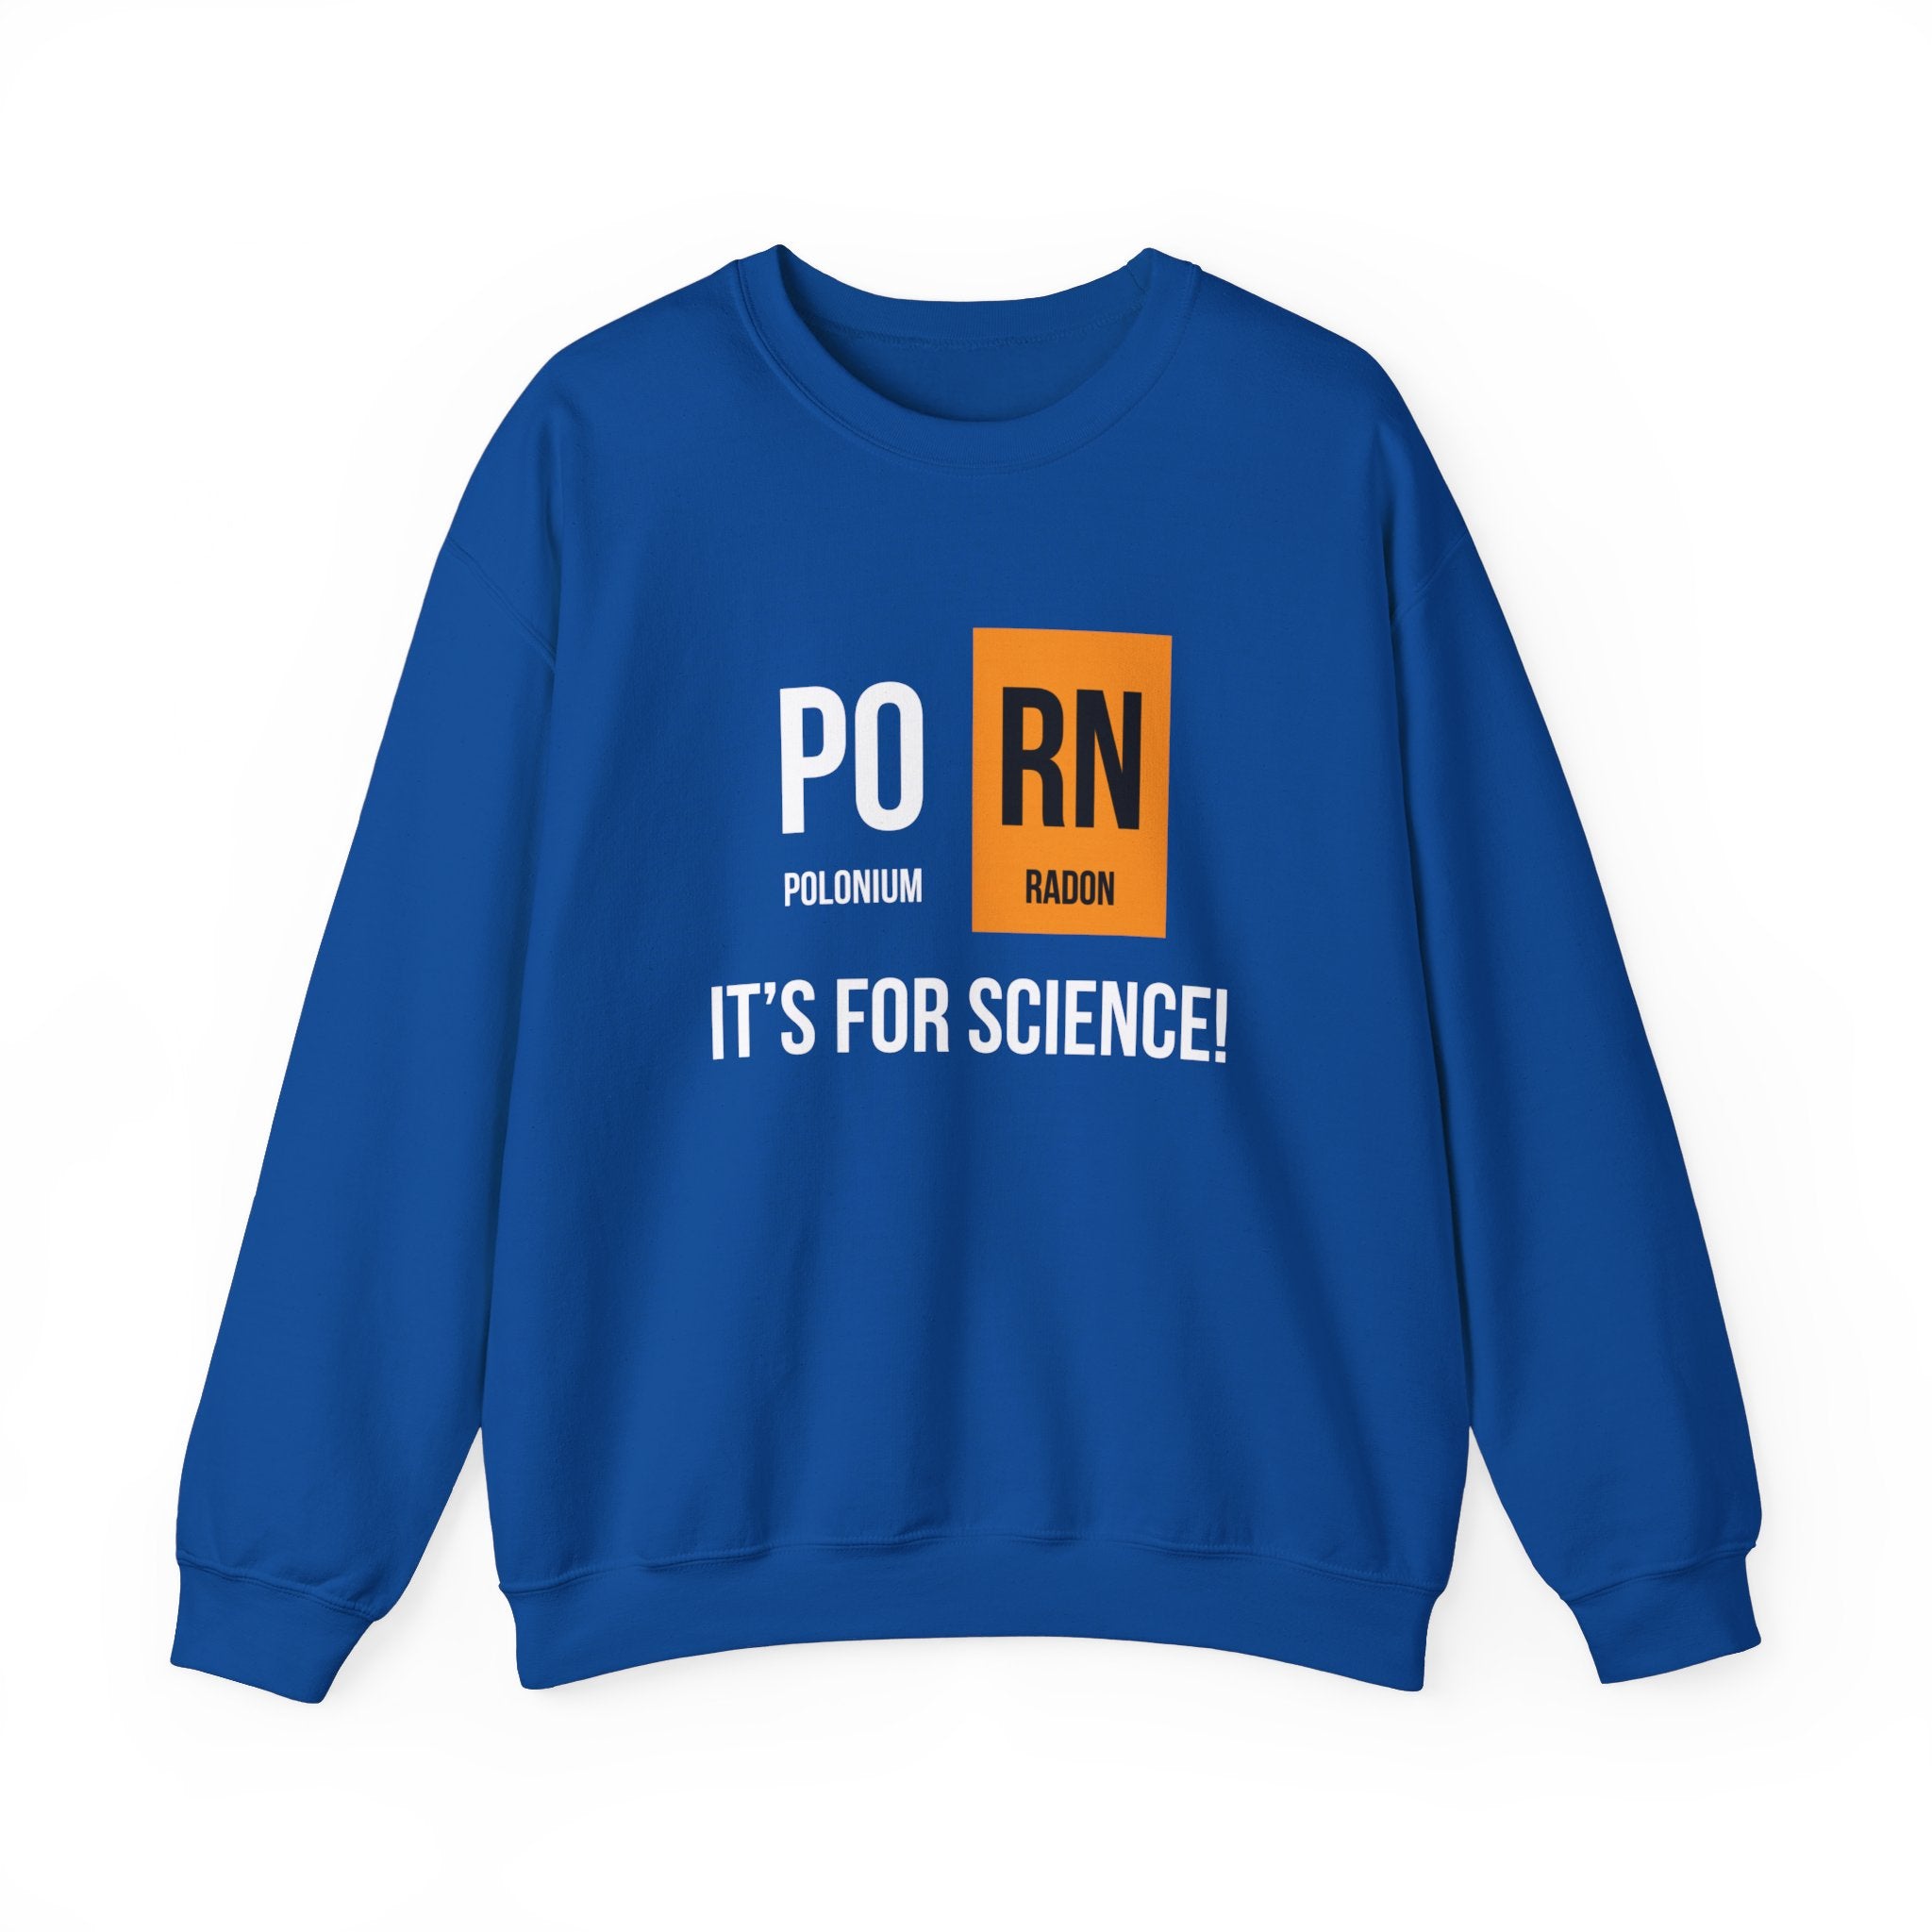 A blue sweatshirt featuring the elements Polonium (Po) and Radon (Rn) from the periodic table, with the phrase "It's for Science!" printed below them. This PO-RN - Sweatshirt is the perfect choice for colder months.